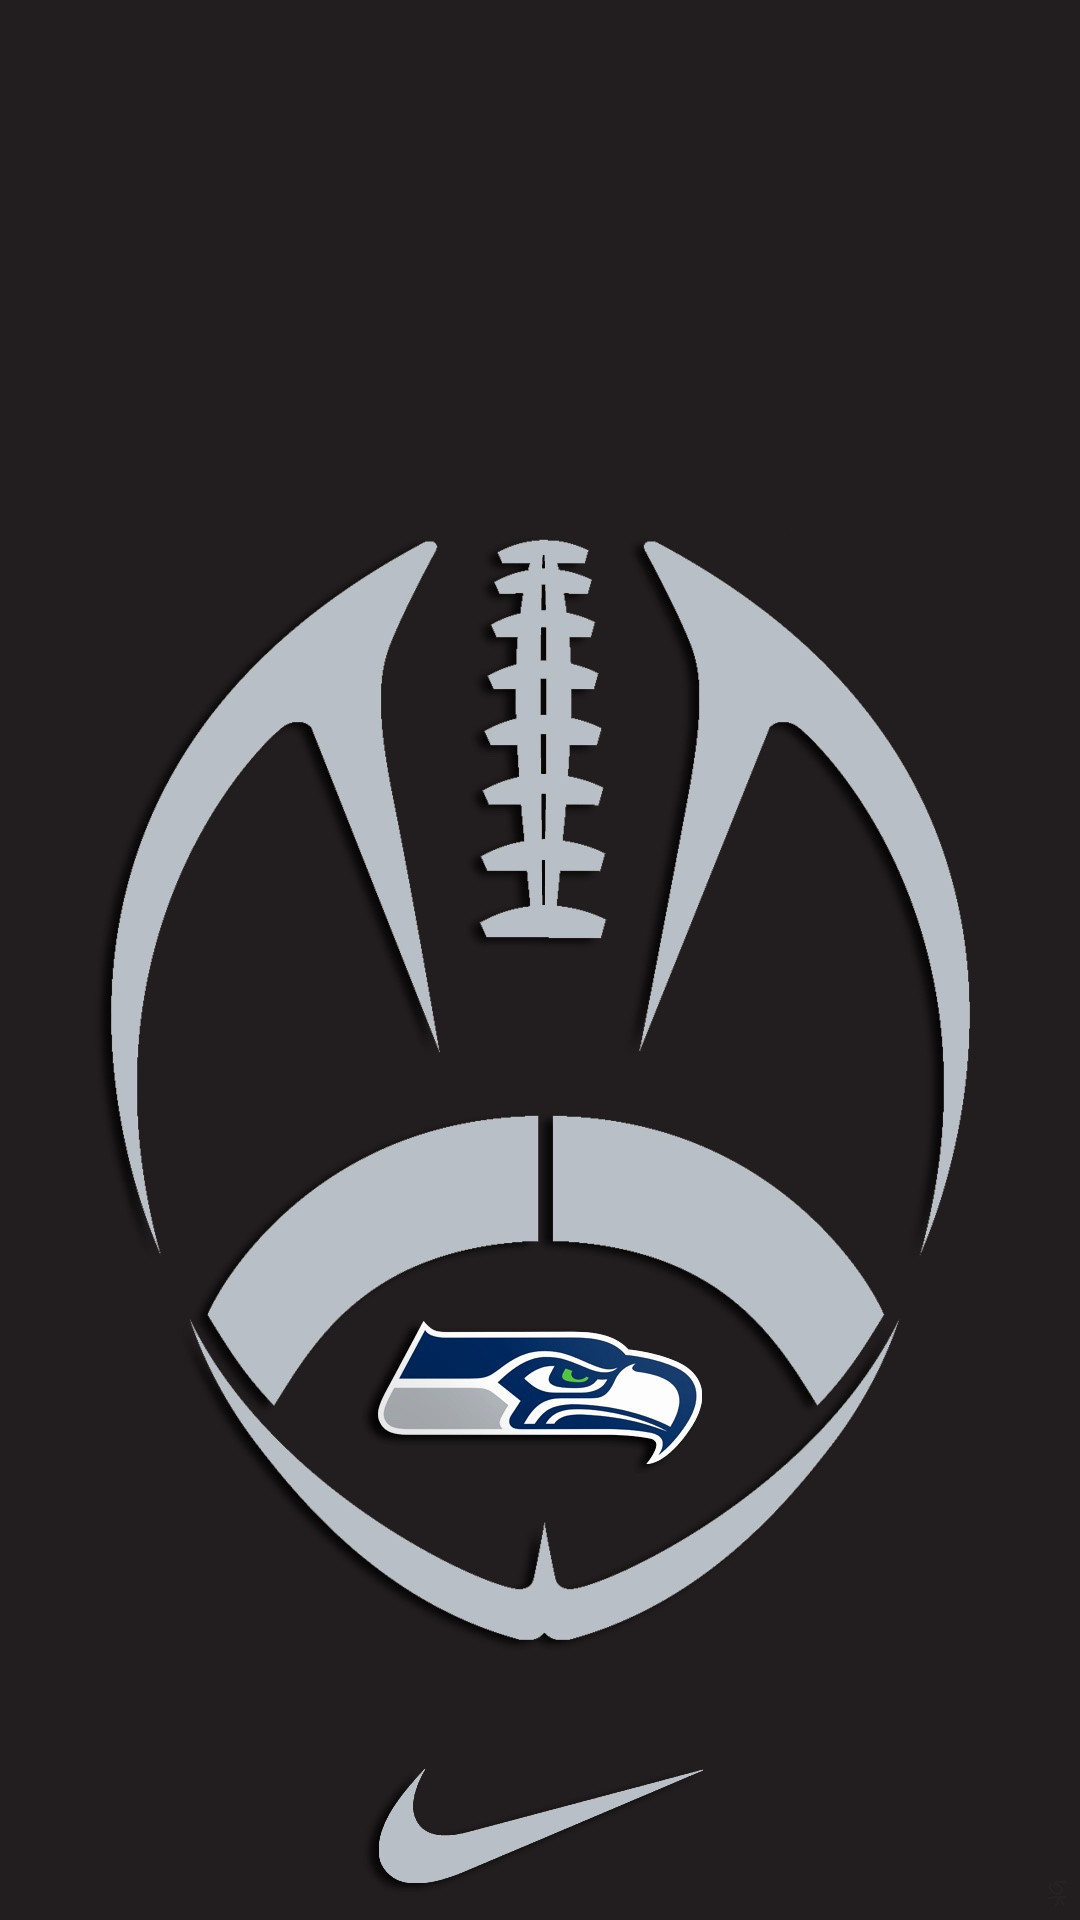 1080x1920 77 2018 Seahawks Wallpapers On Wallpaperplay